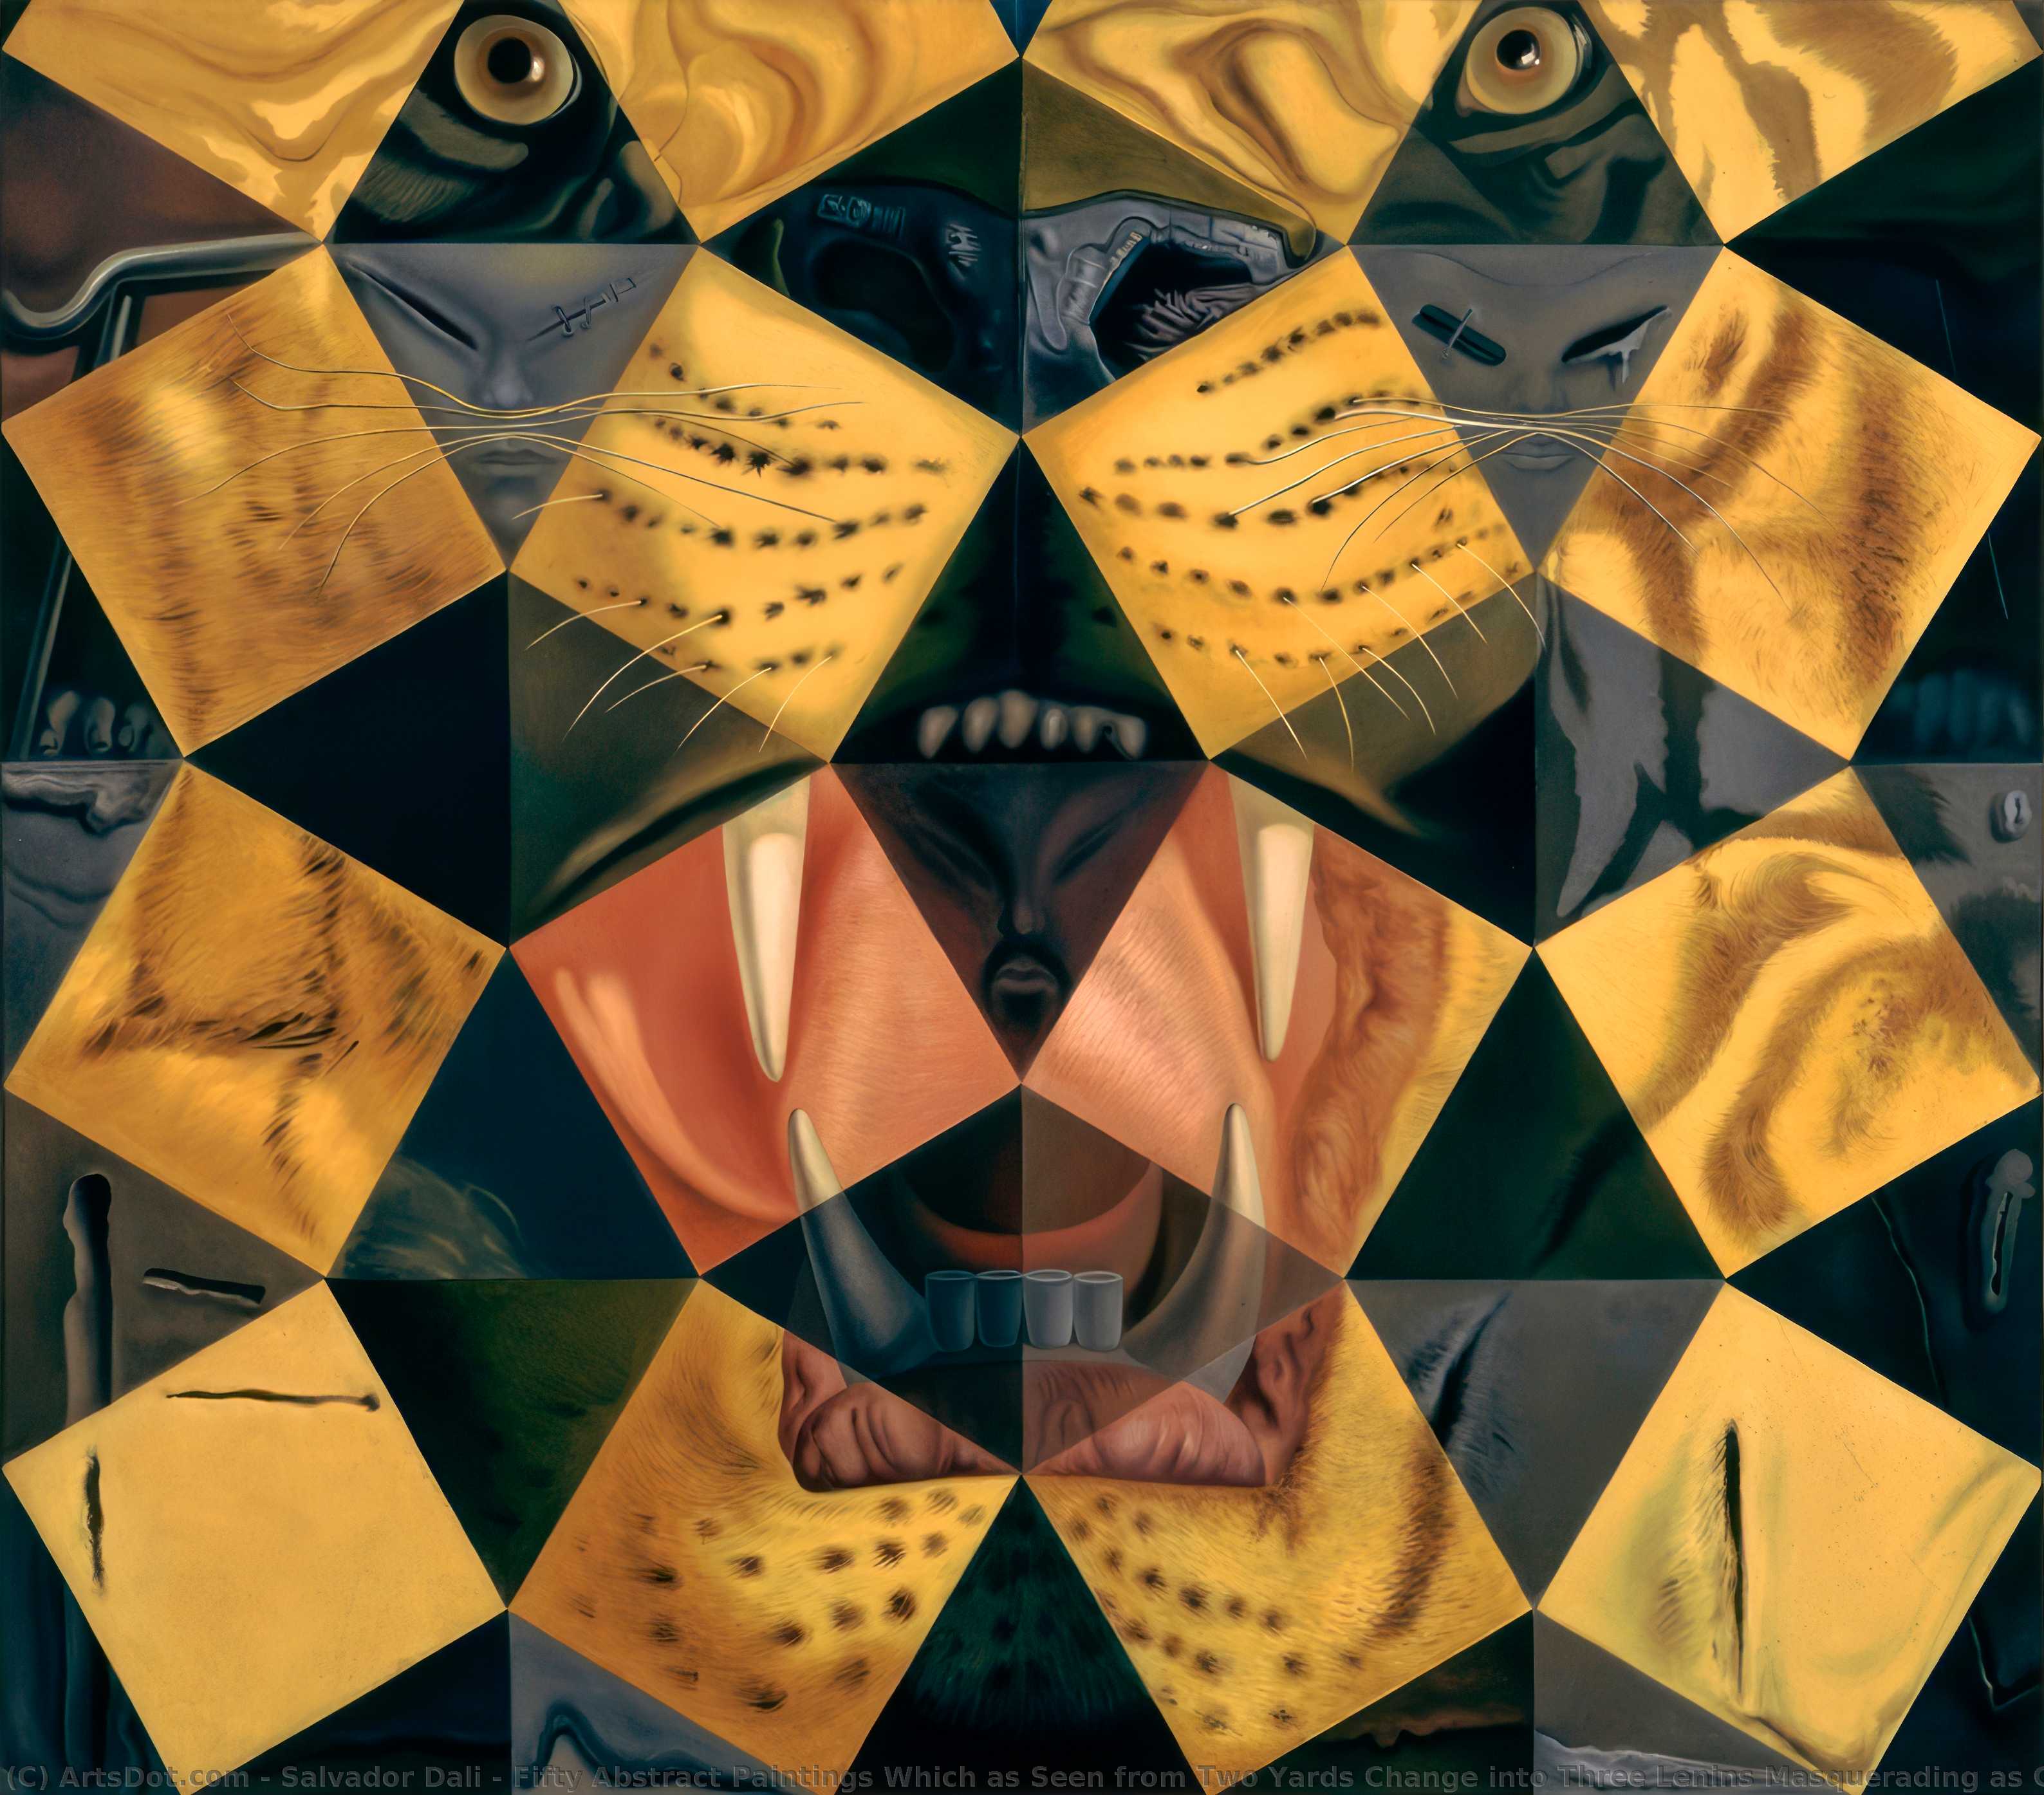 WikiOO.org - Encyclopedia of Fine Arts - Malba, Artwork Salvador Dali - Fifty Abstract Paintings Which as Seen from Two Yards Change into Three Lenins Masquerading as Chinese and as Seen from Six Yards Appear as the Head of a Royal Bengal Tiger, 1963